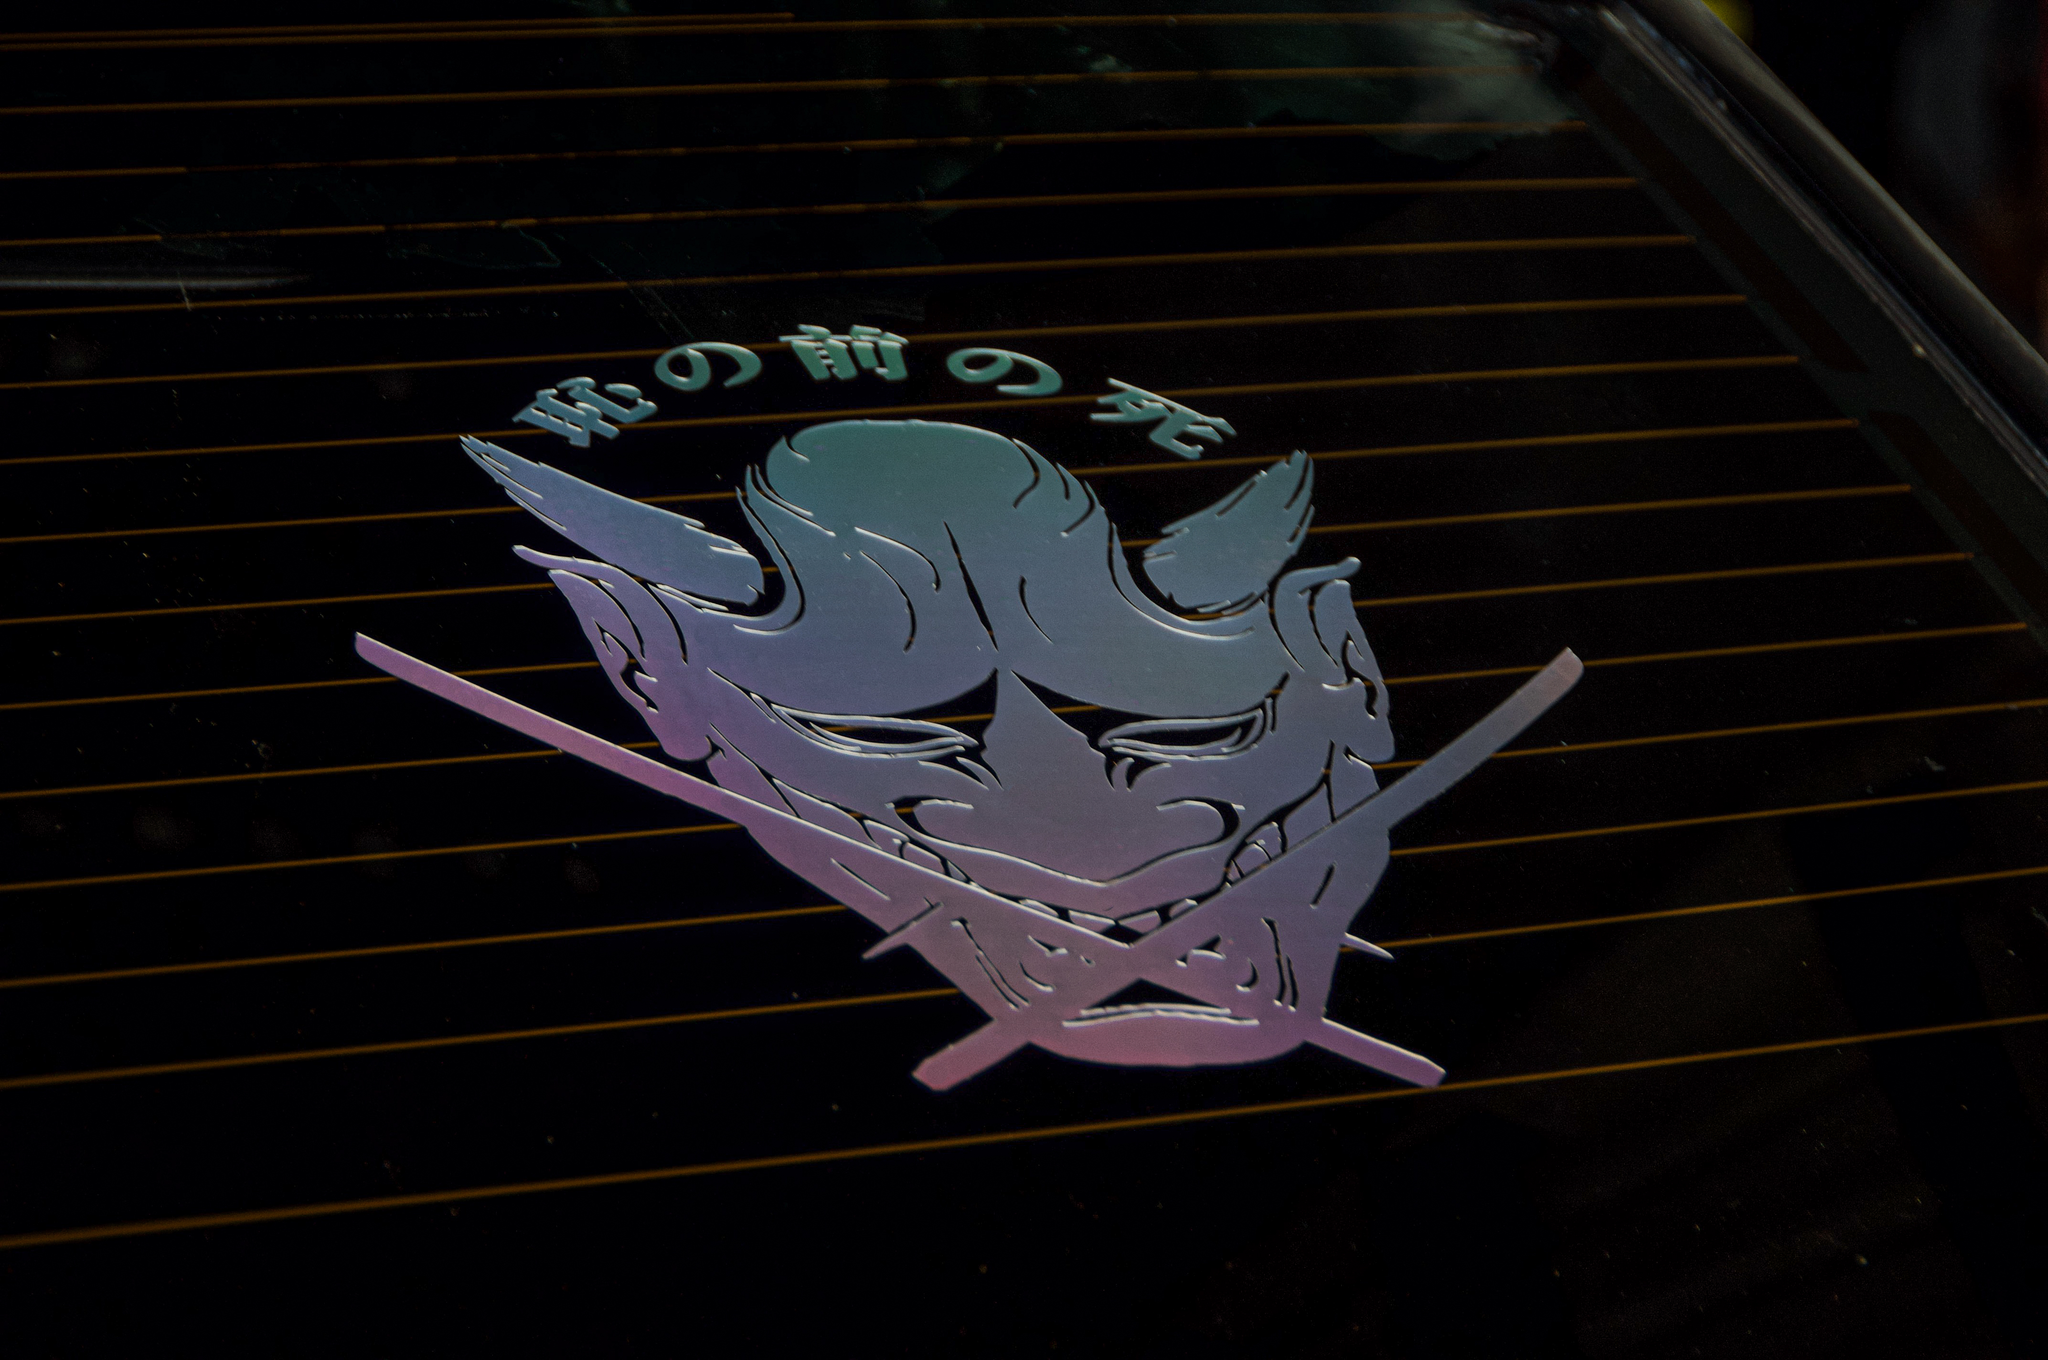 Oni Mask "Death before Dishonour" | Decal